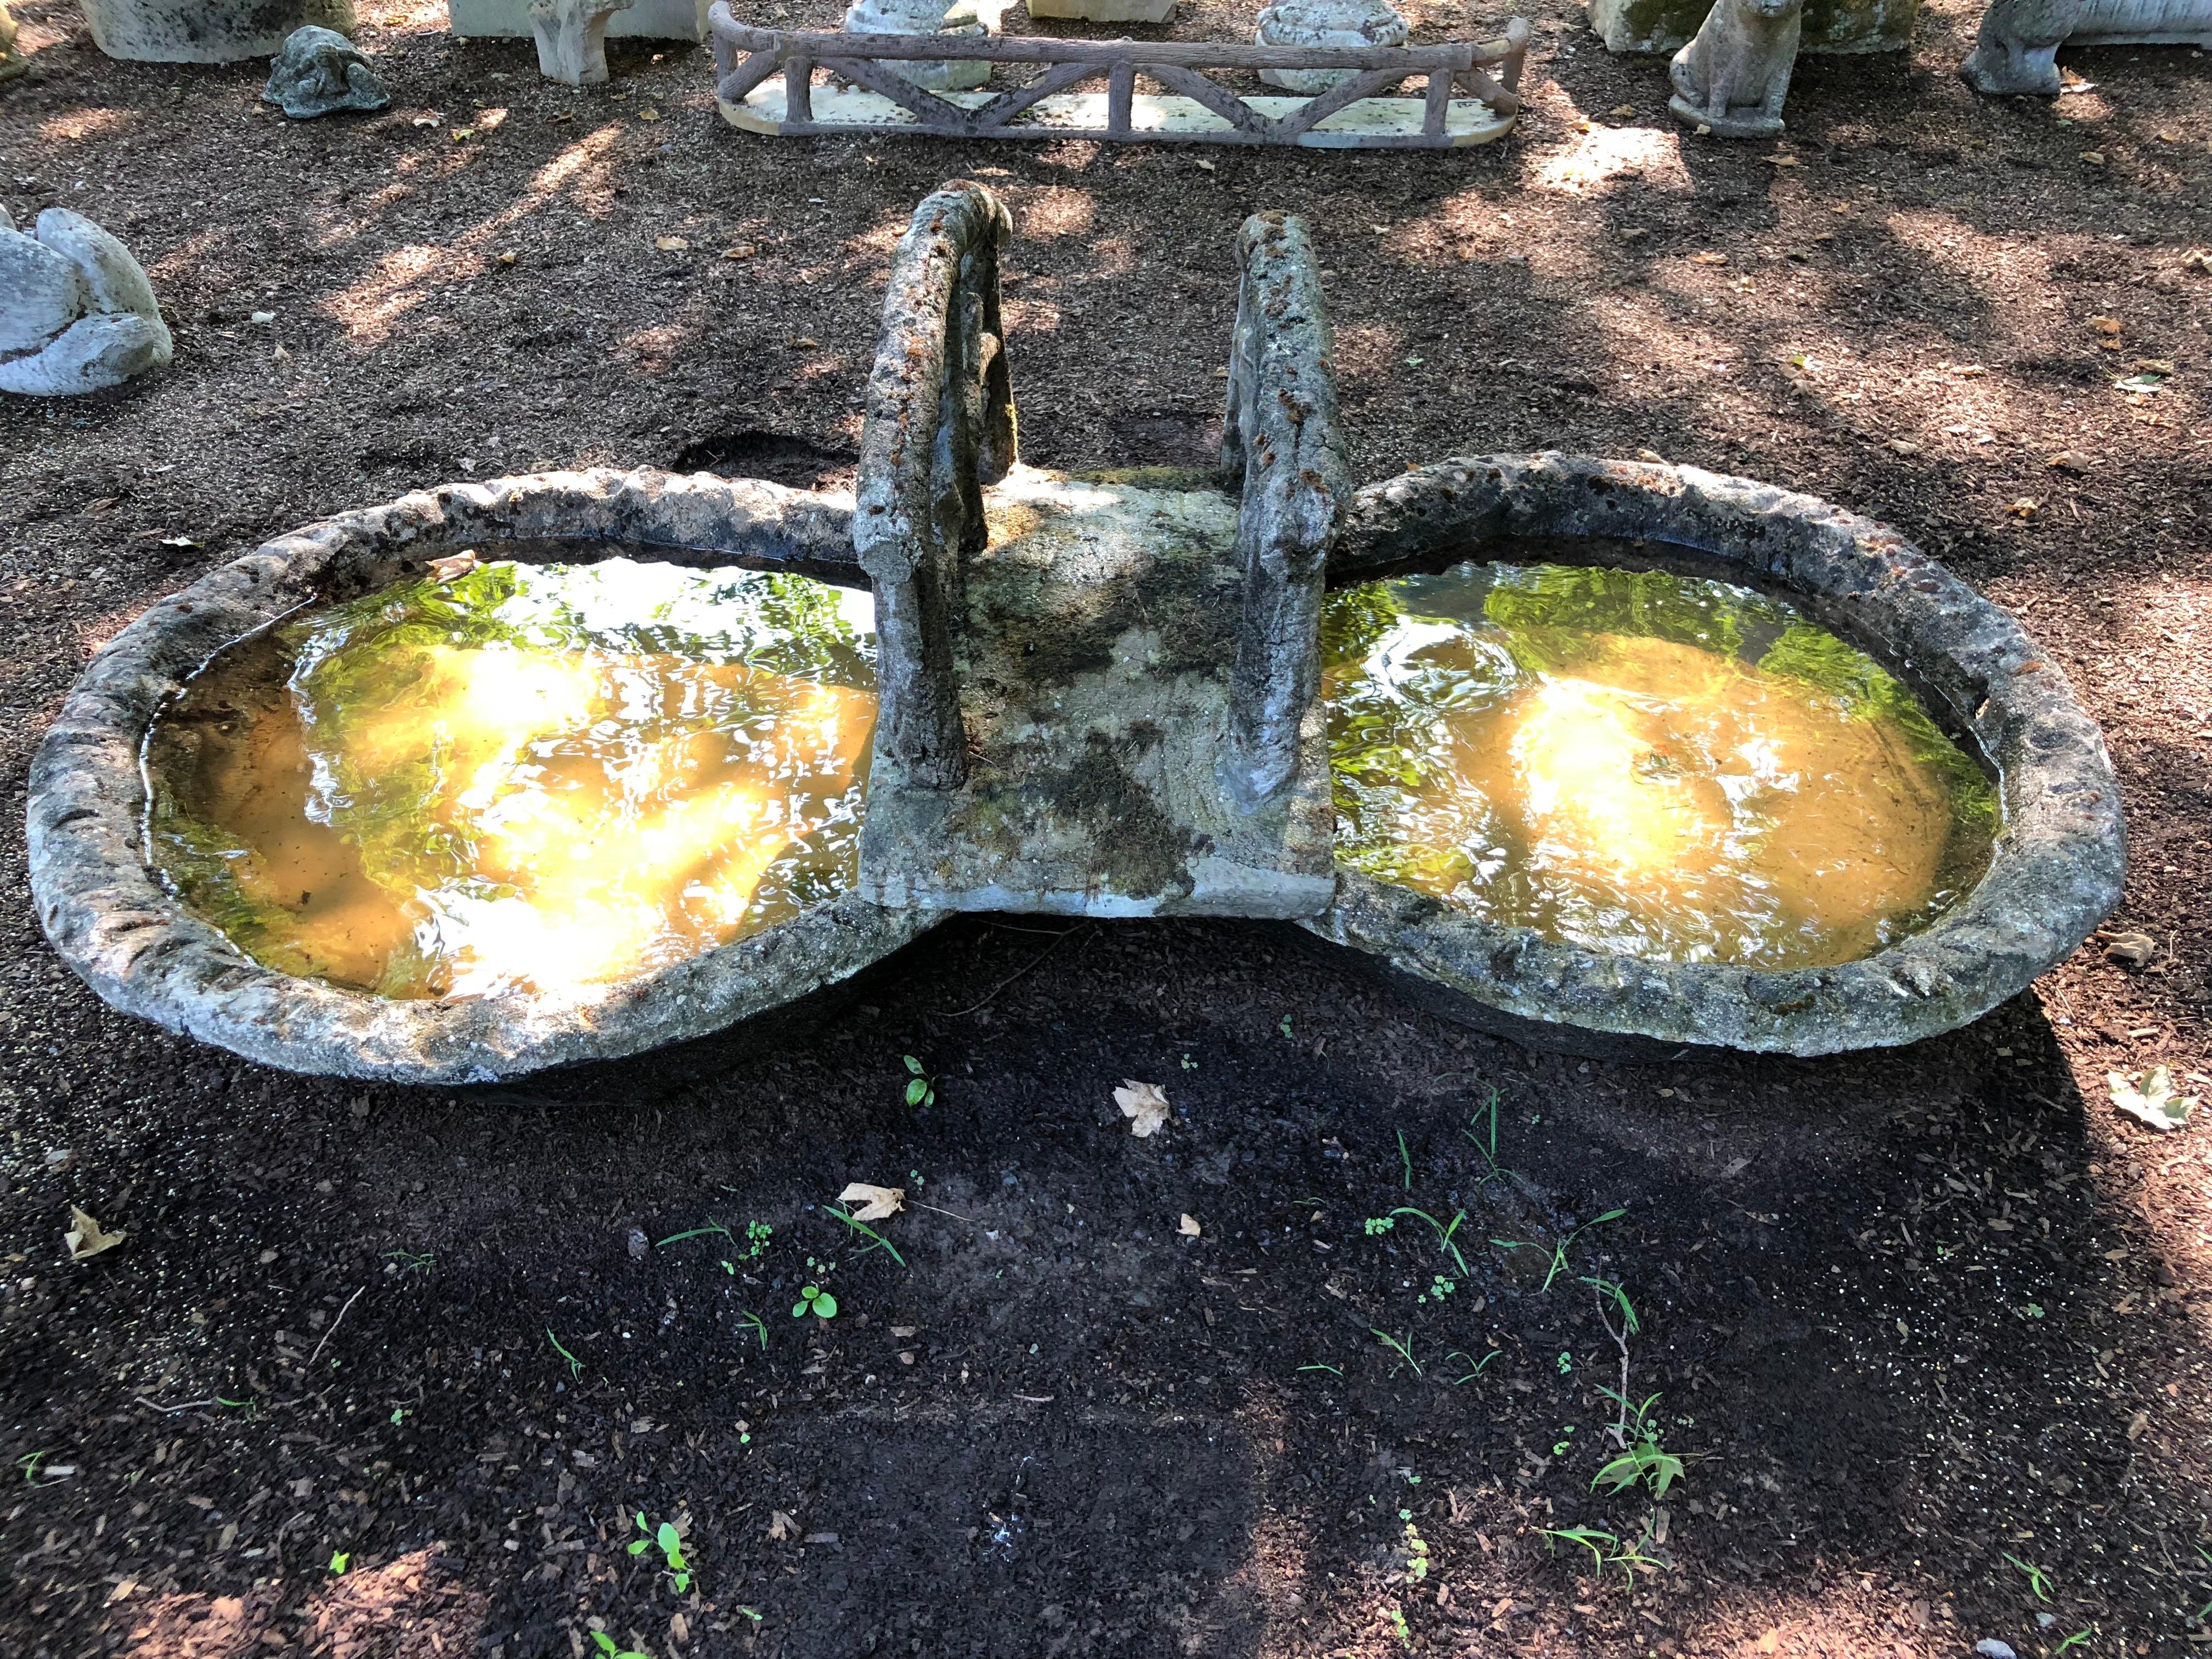 Now here is a show-stopper for lovers of faux bois! The very rare single-piece kidney-shaped pond is sufficiently deep to float water plants or pot it up with your favourite flowers or veggies. The moss-laden bridge is original to the pond, but